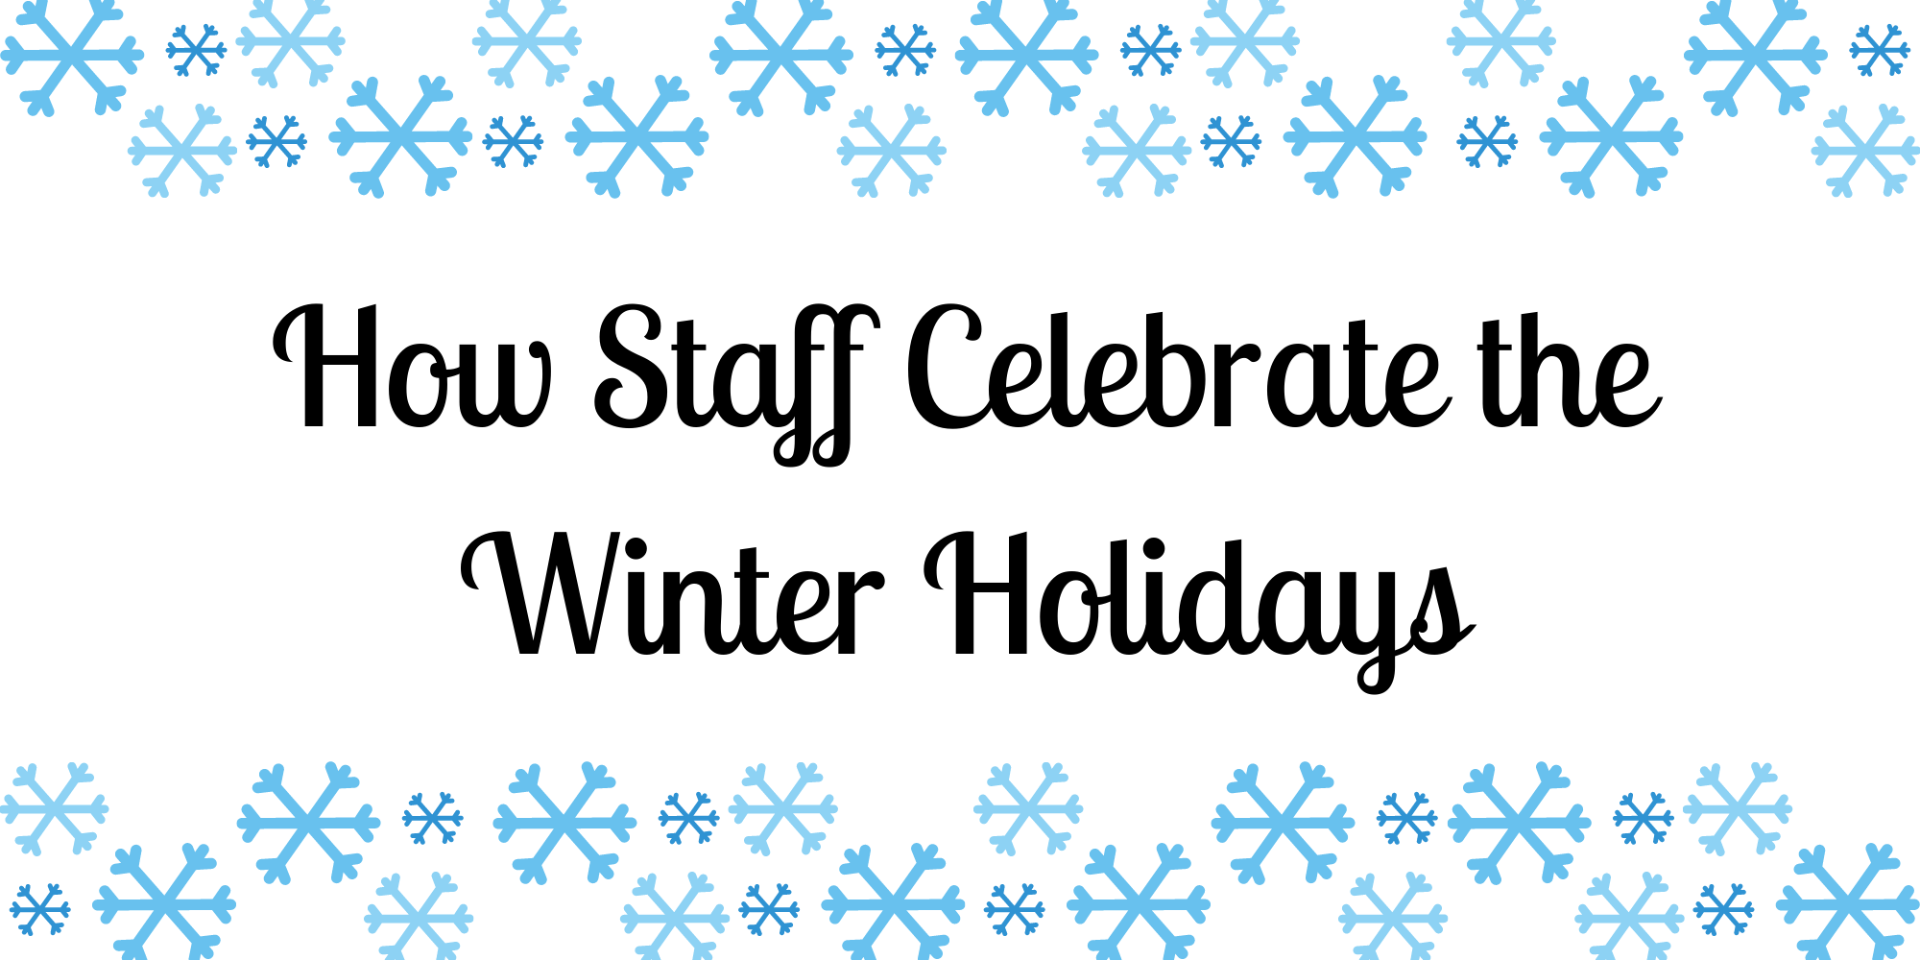 How Staff Celebrate the Winter Holidays